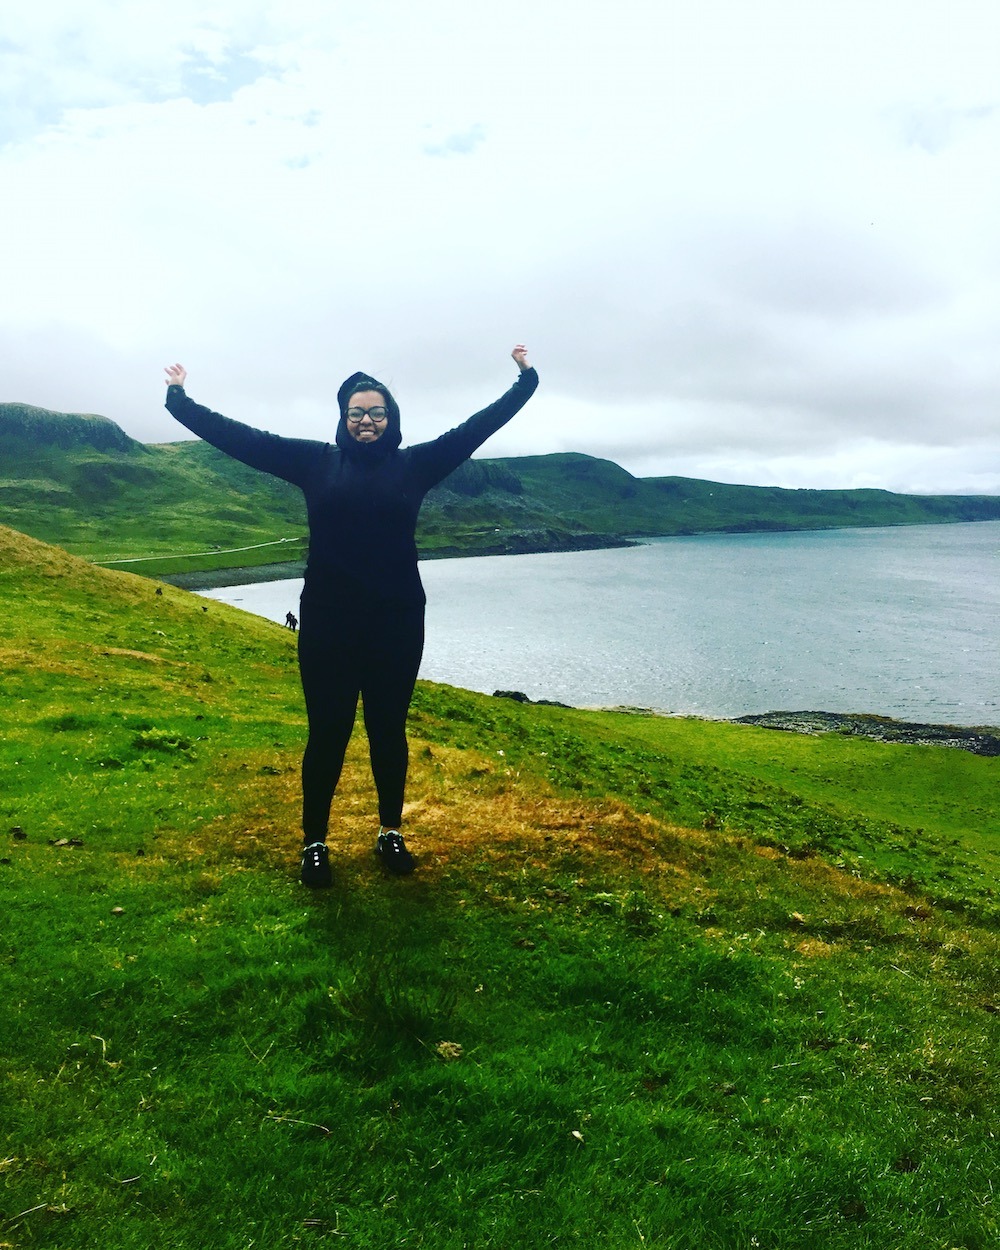 Mari in Scotland, where she's currently based as an online English teacher